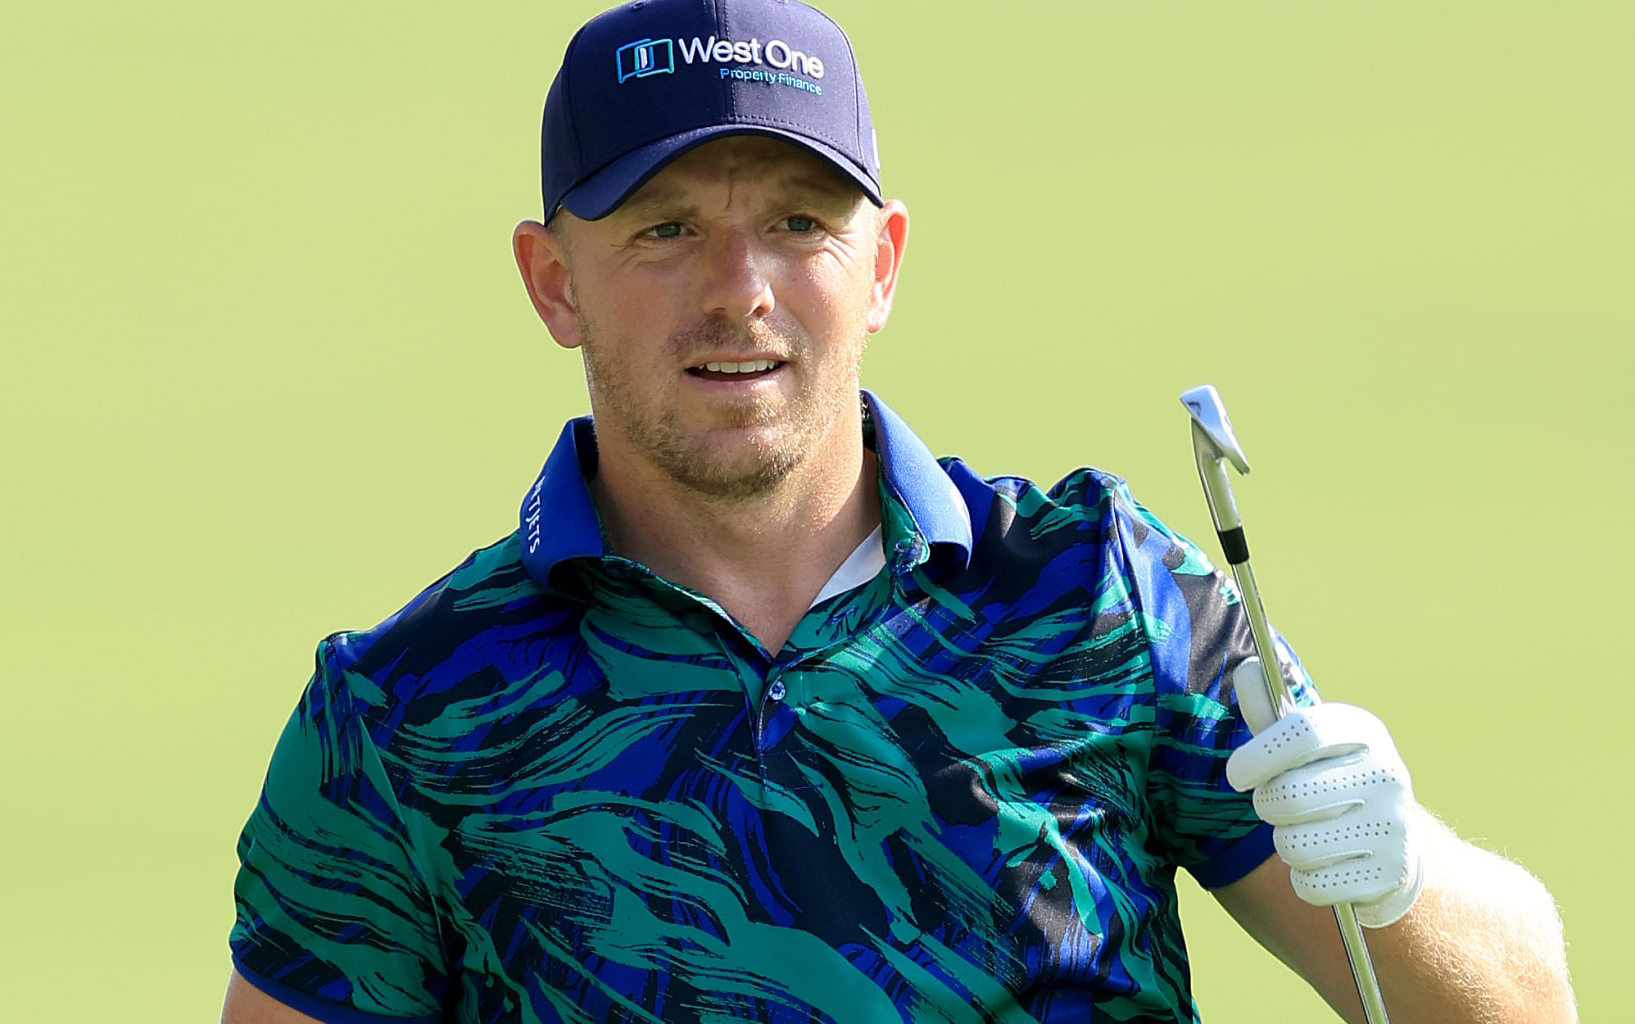 Wallace birdies the entire back nine in his round 60 to rise to the top at DP World Tour Champs   